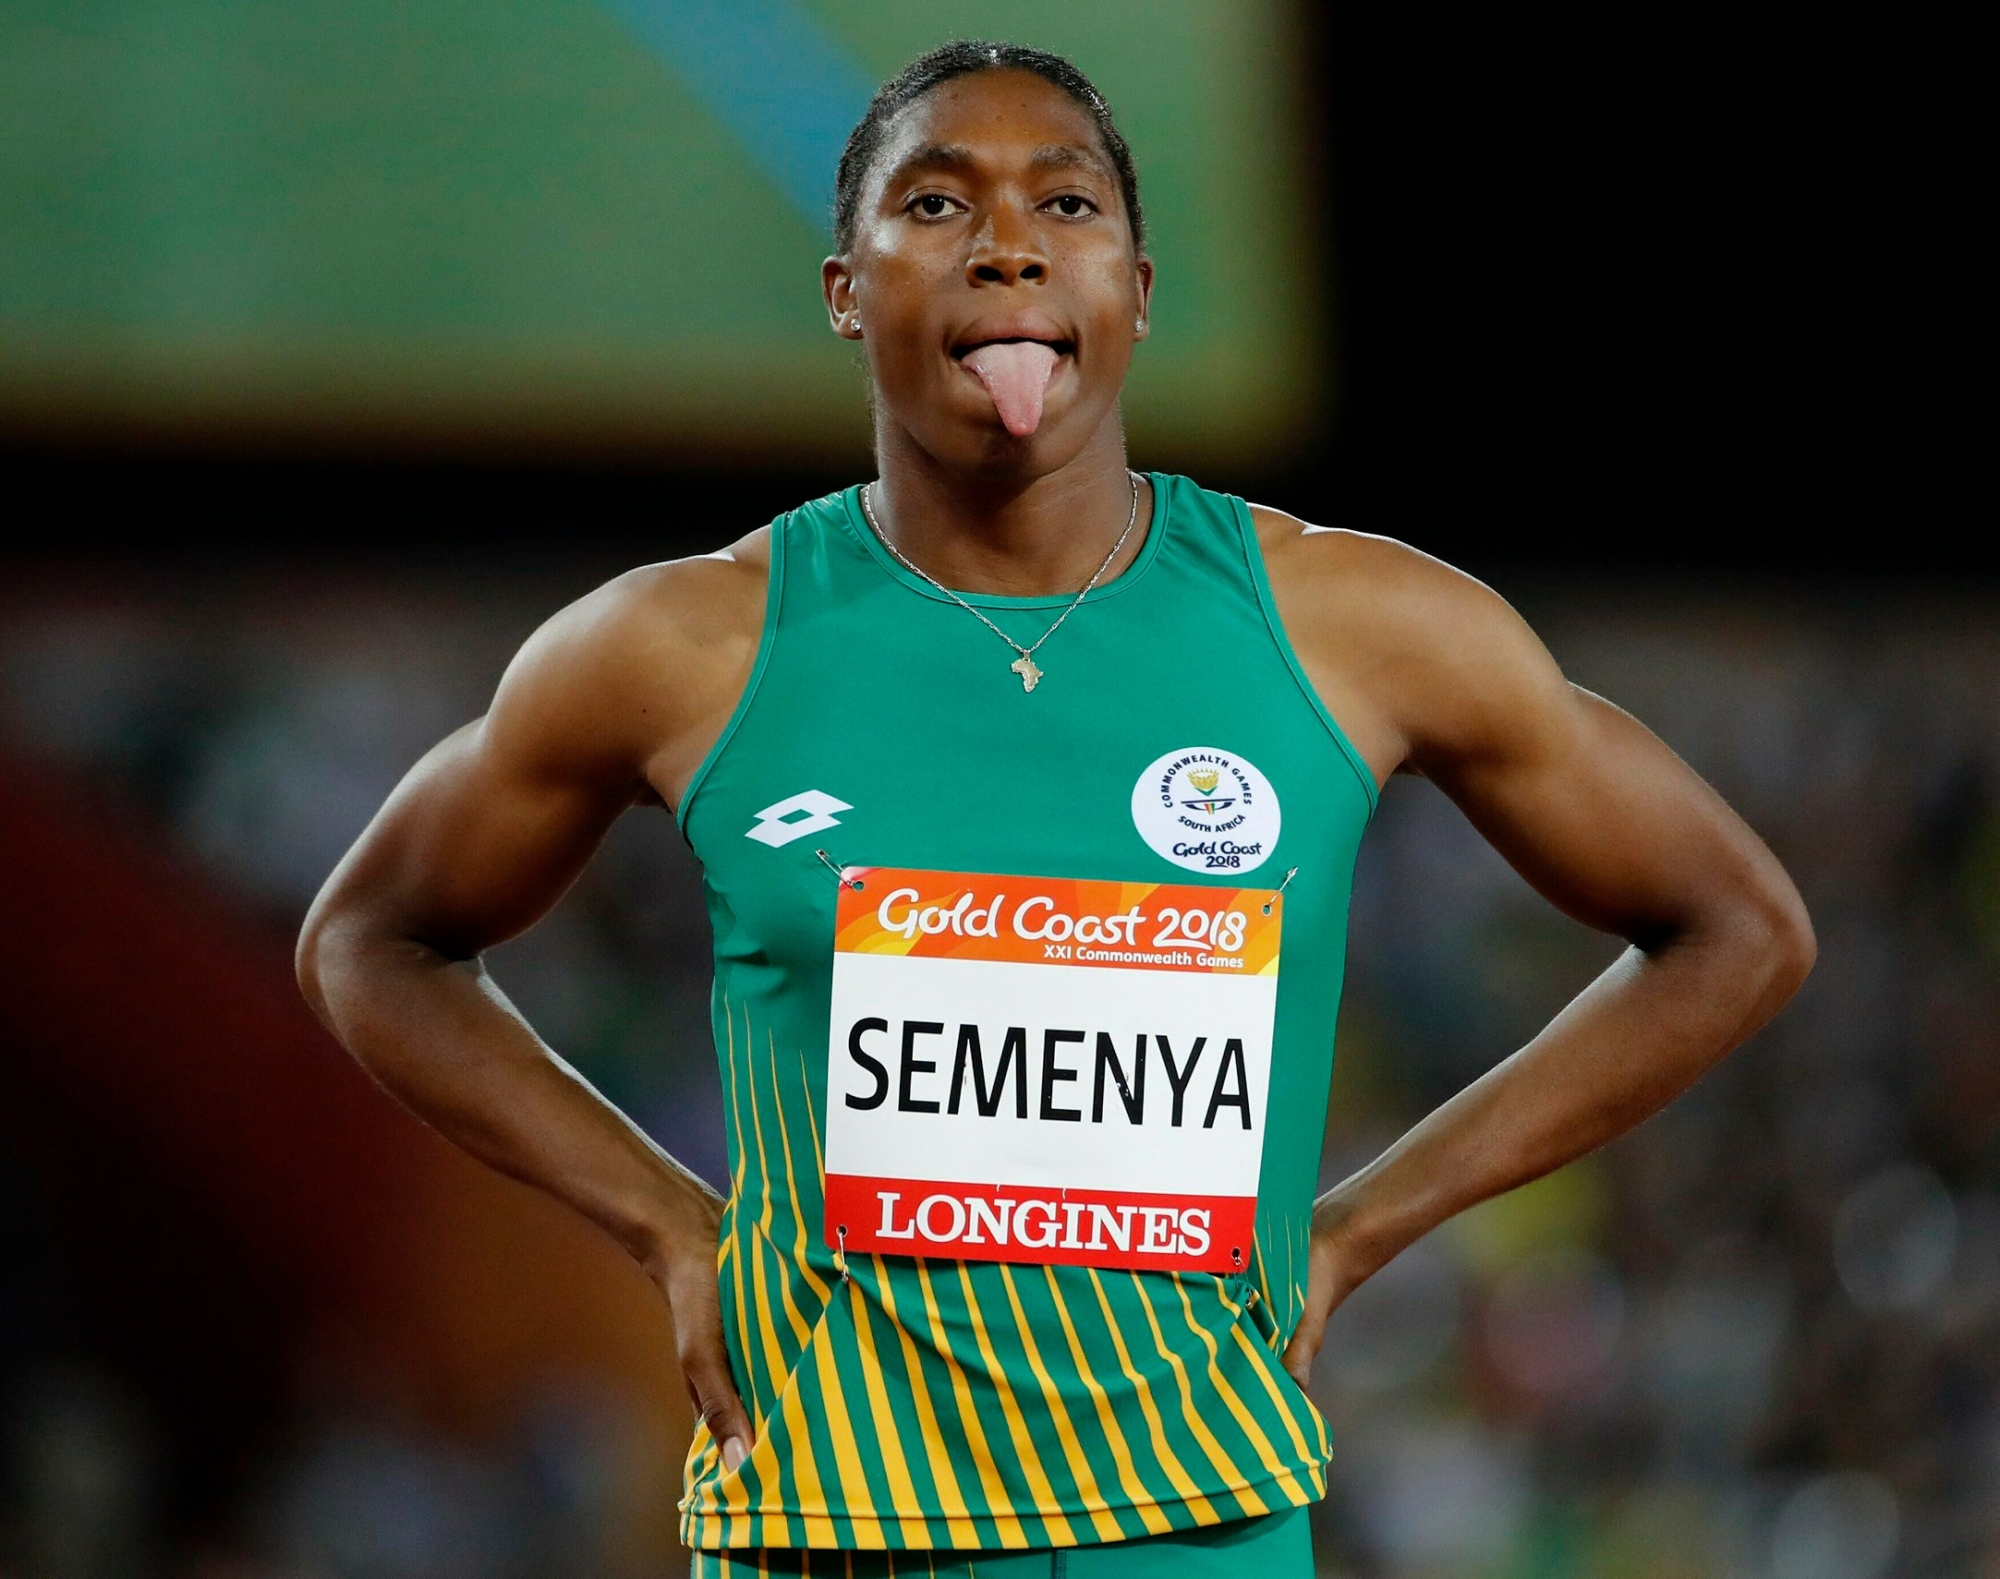 FILE - In this Friday, April 13, 2018 file photo South Africa's Caster Semenya waits to compete in the woman's 800m final at Carrara Stadium during the 2018 Commonwealth Games on the Gold Coast, Australia. Caster Semenya lost her appeal Wednesday May 1, 2019 against rules designed to decrease naturally high testosterone levels in some female runners. (AP Photo/Mark Schiefelbein, File) Athletics CAS Semenya Appeal